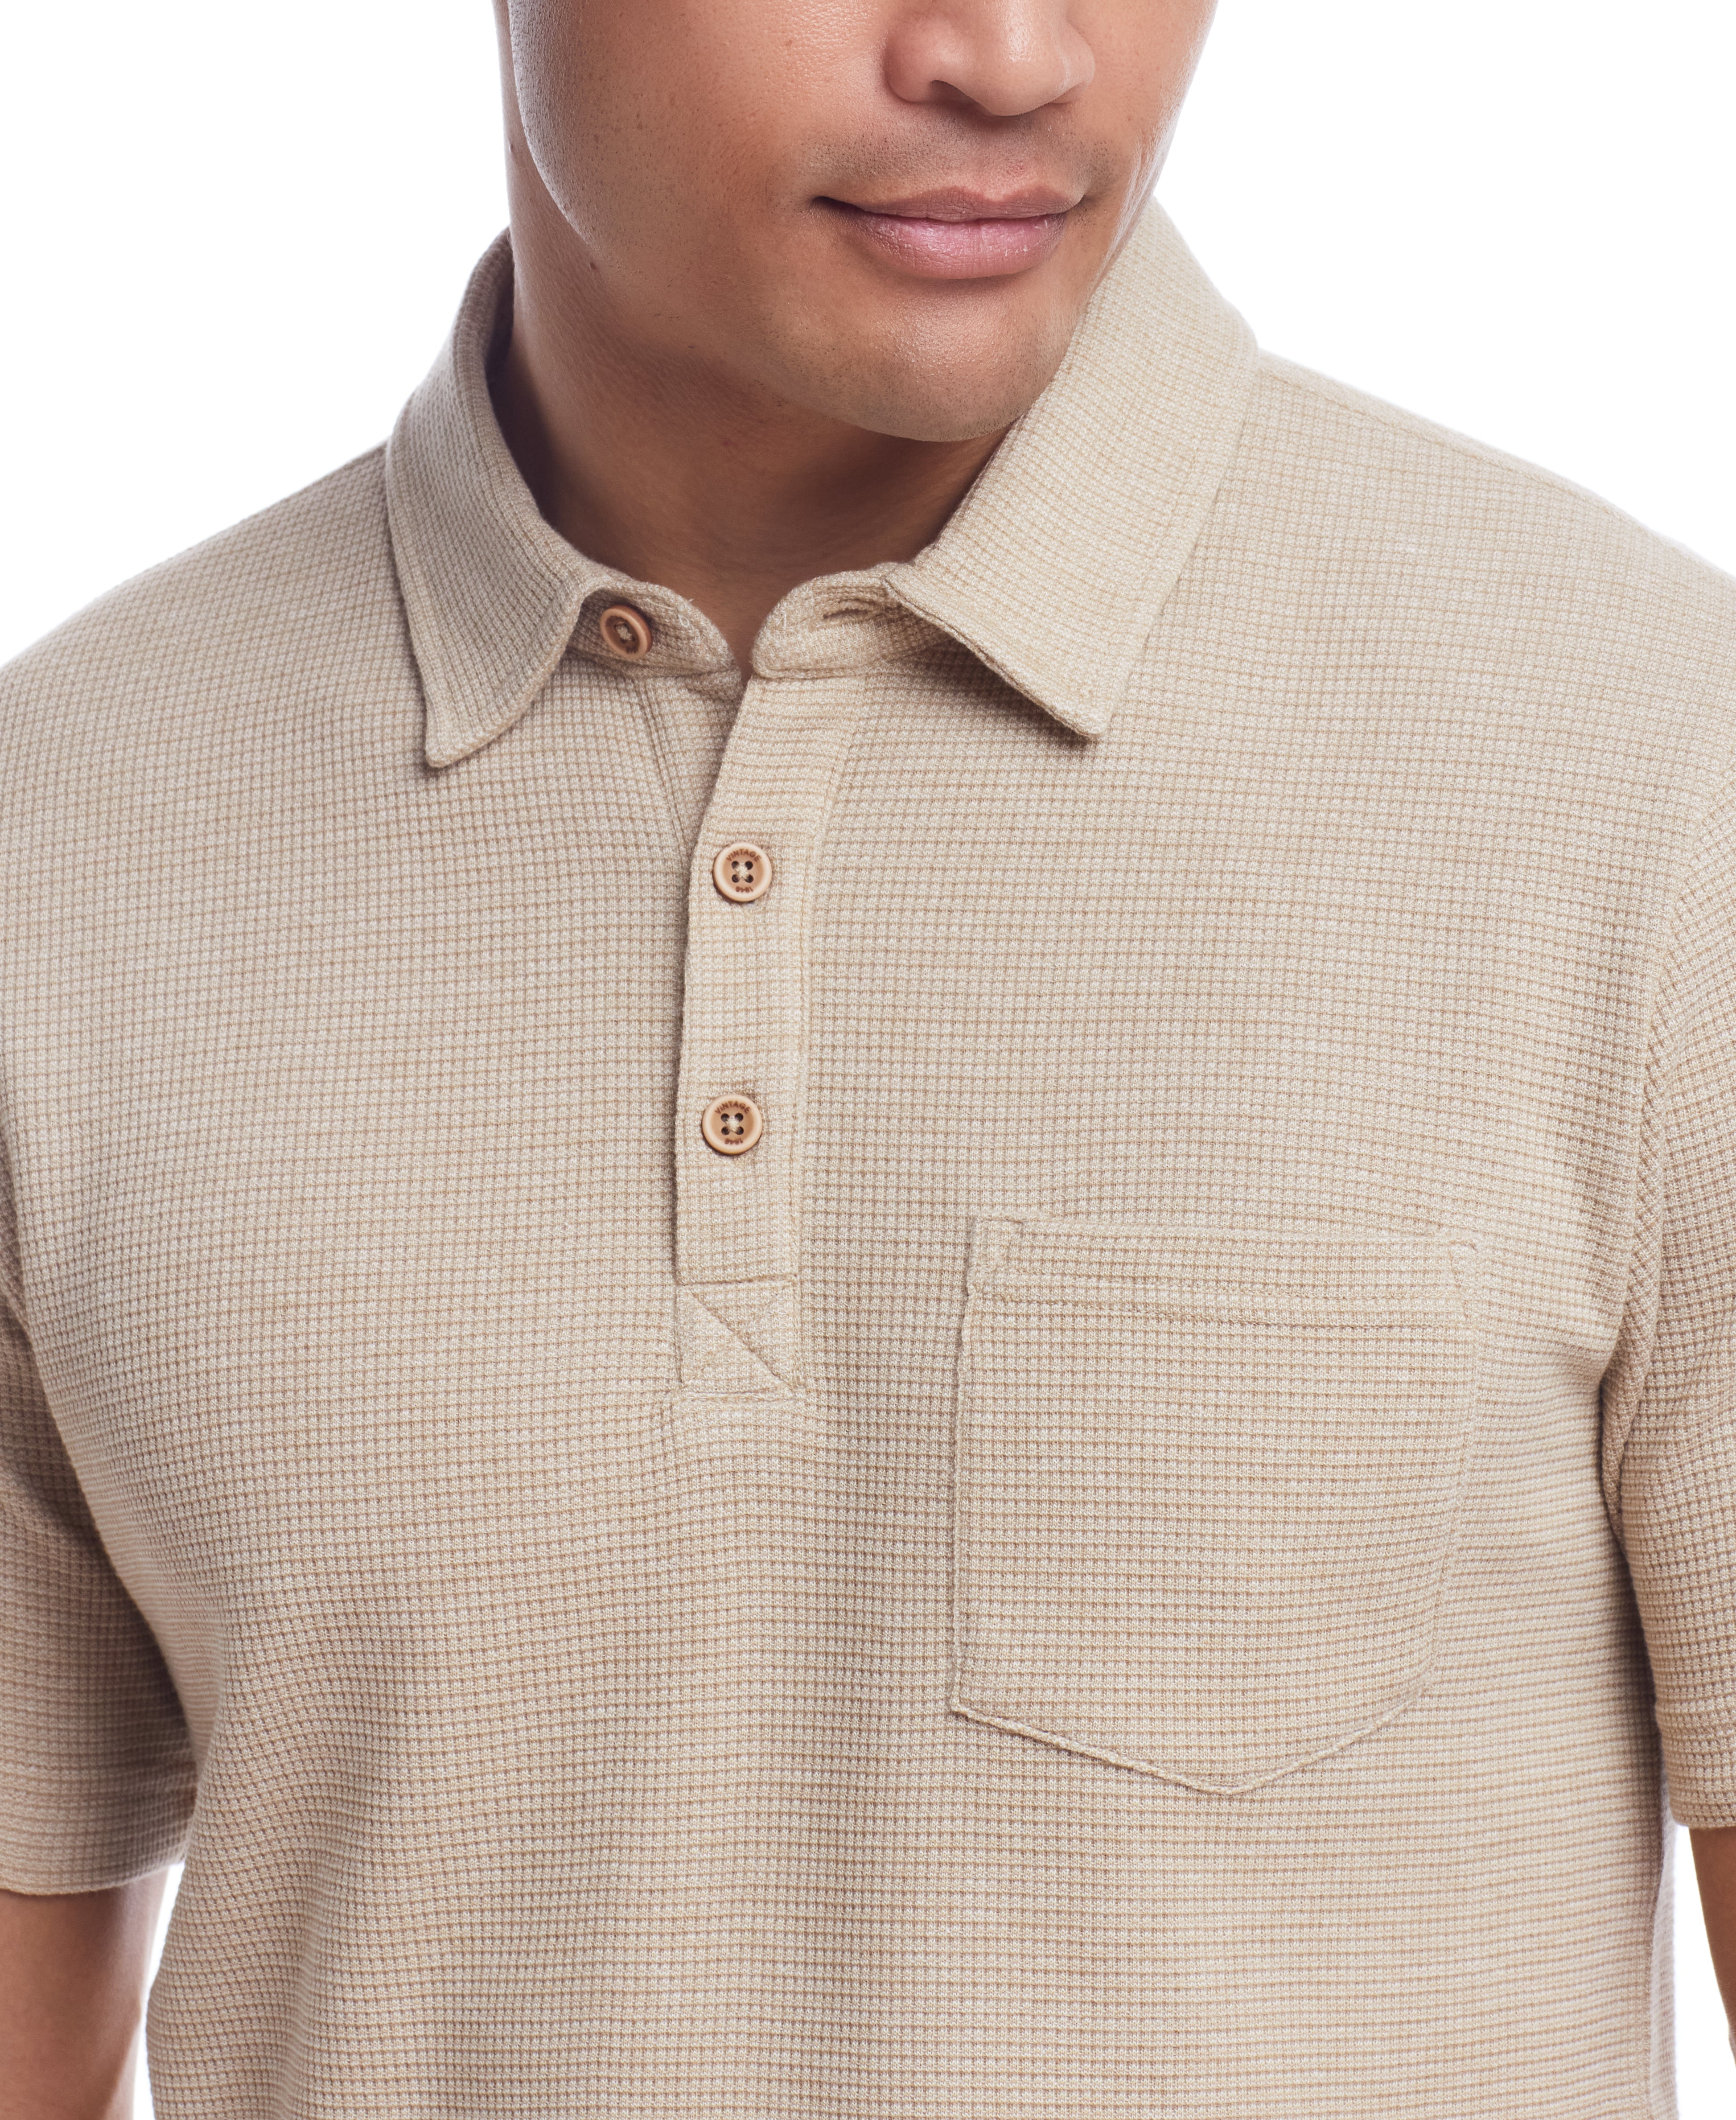 WAFFLE POLO in ANTIQUE WHITE